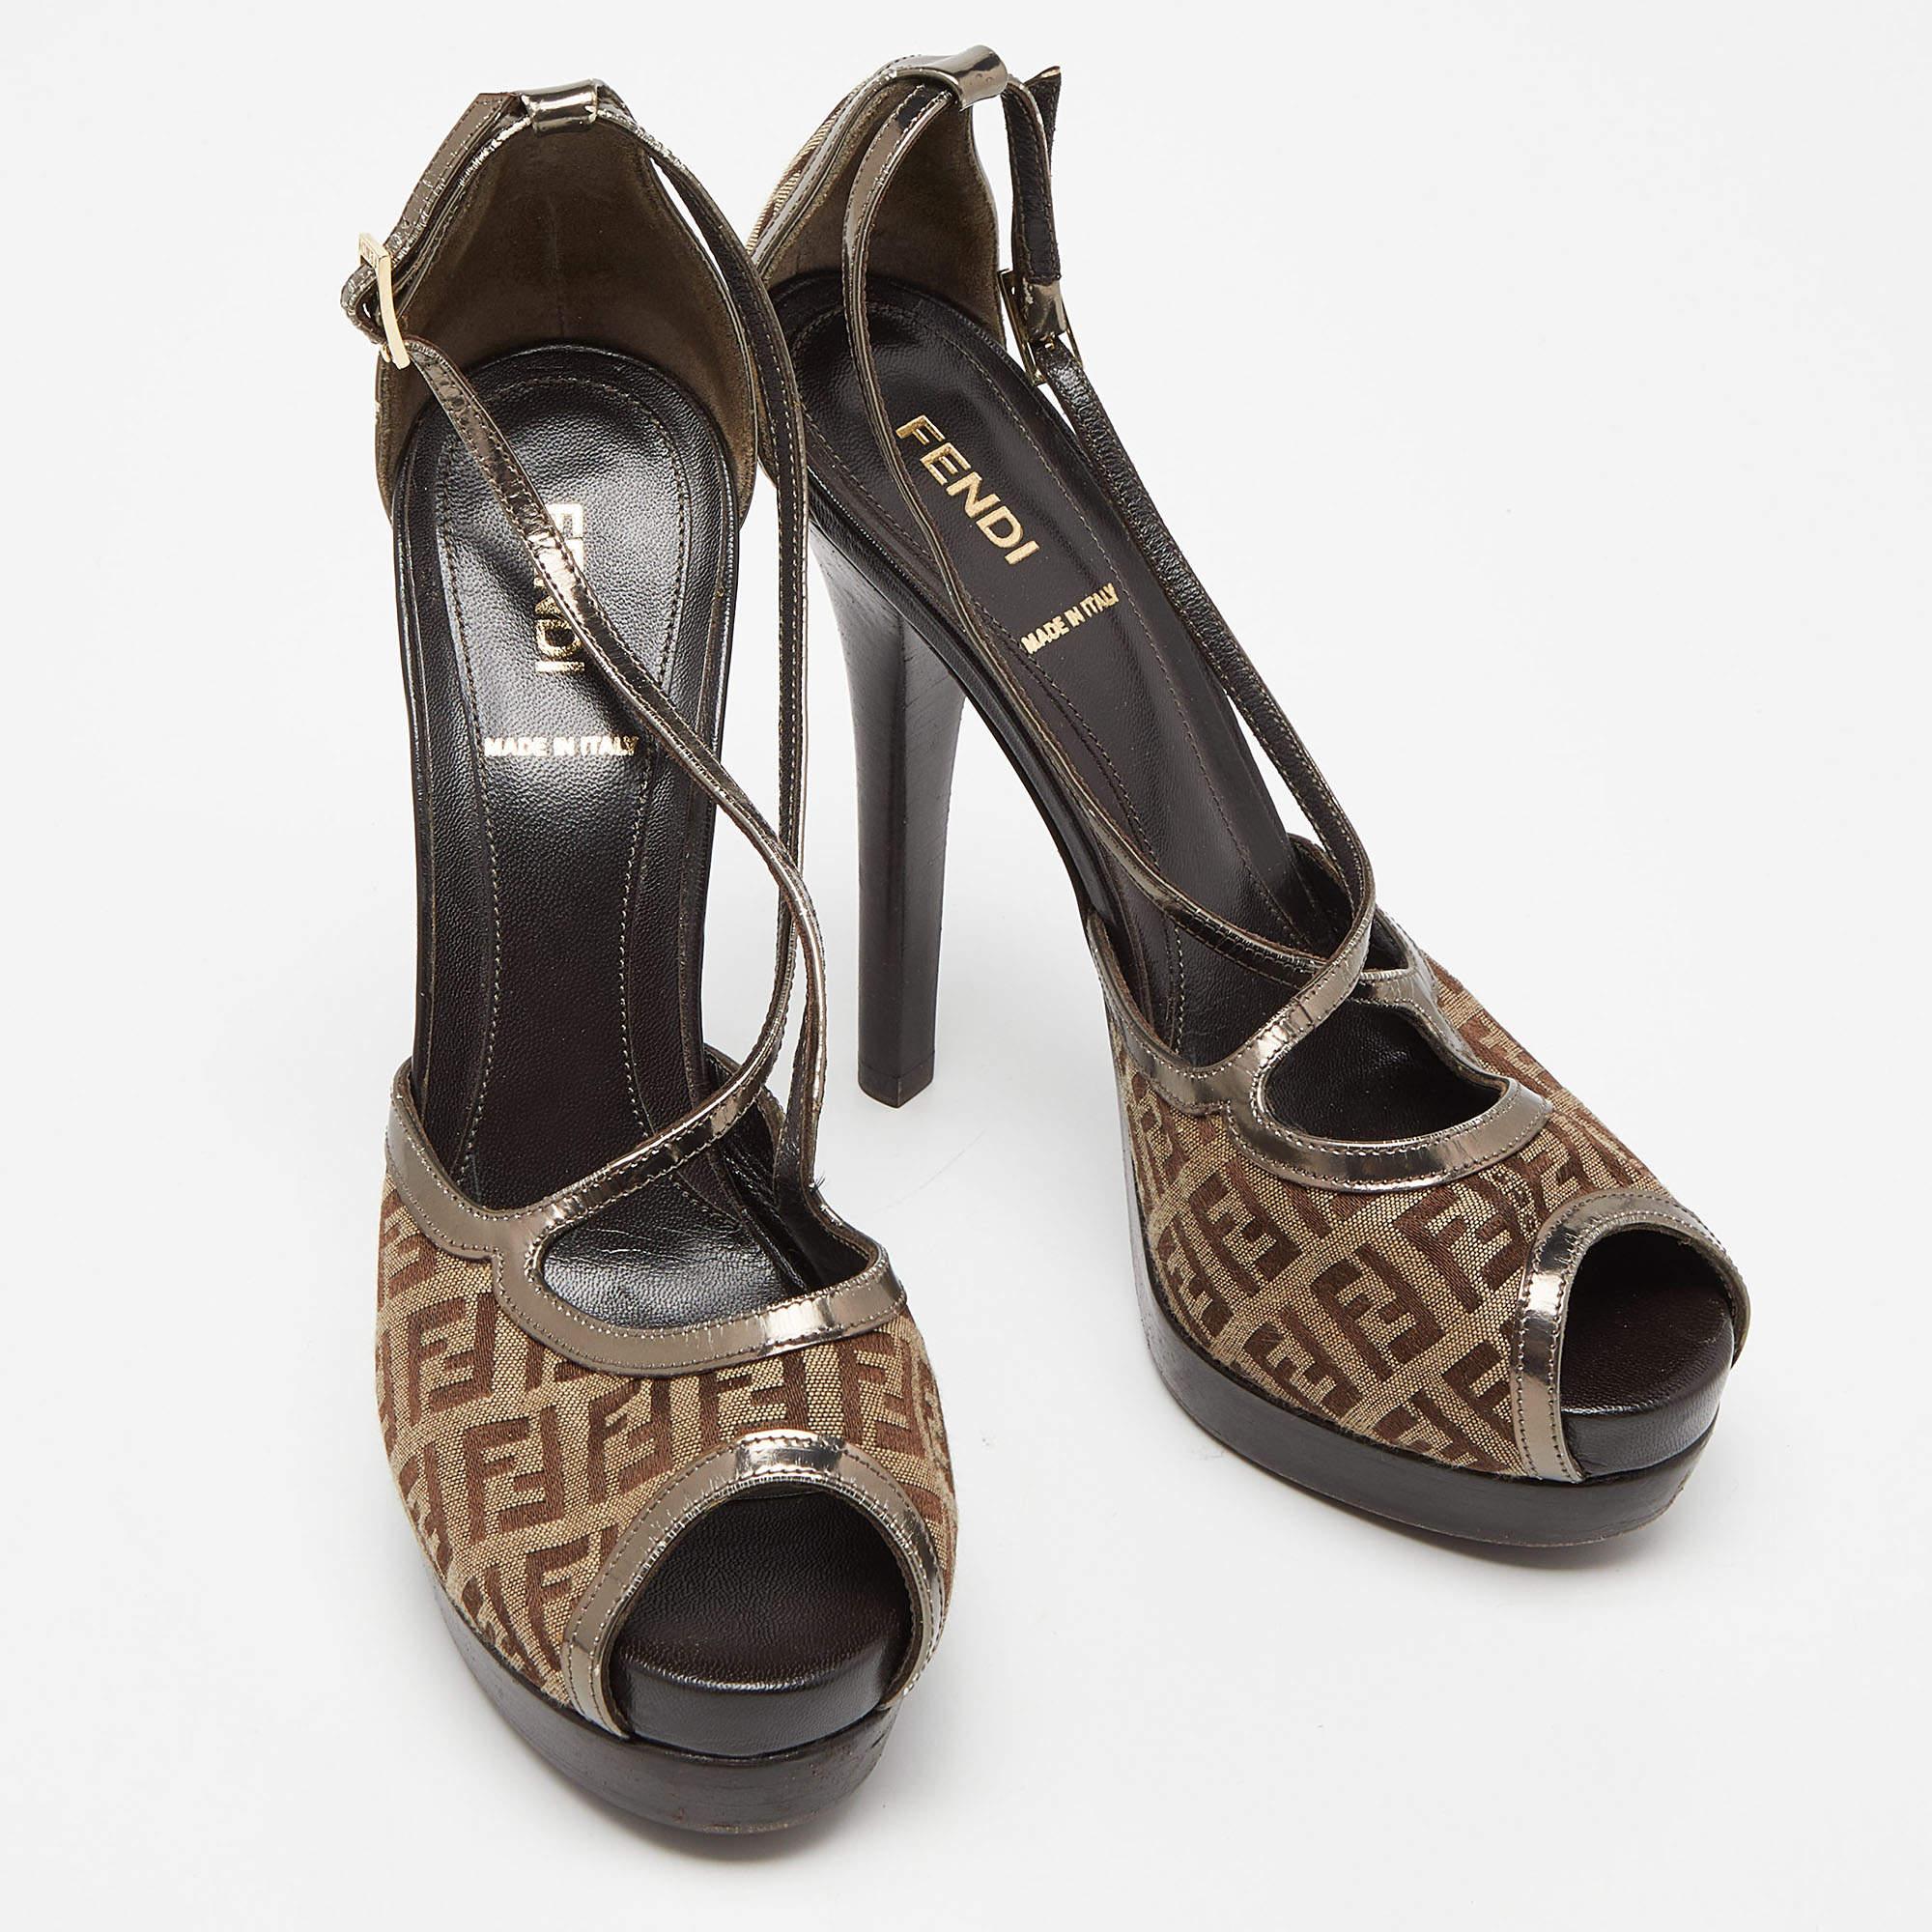 Bring out the diva in you in this fancy platform sandals from Fendi. Made in Italy, this Fendi Zucchino peep-toe pair has a canvas exterior, gold-tone lining, and prints of the signature logo of the Italian fashion house. Make every step stylish